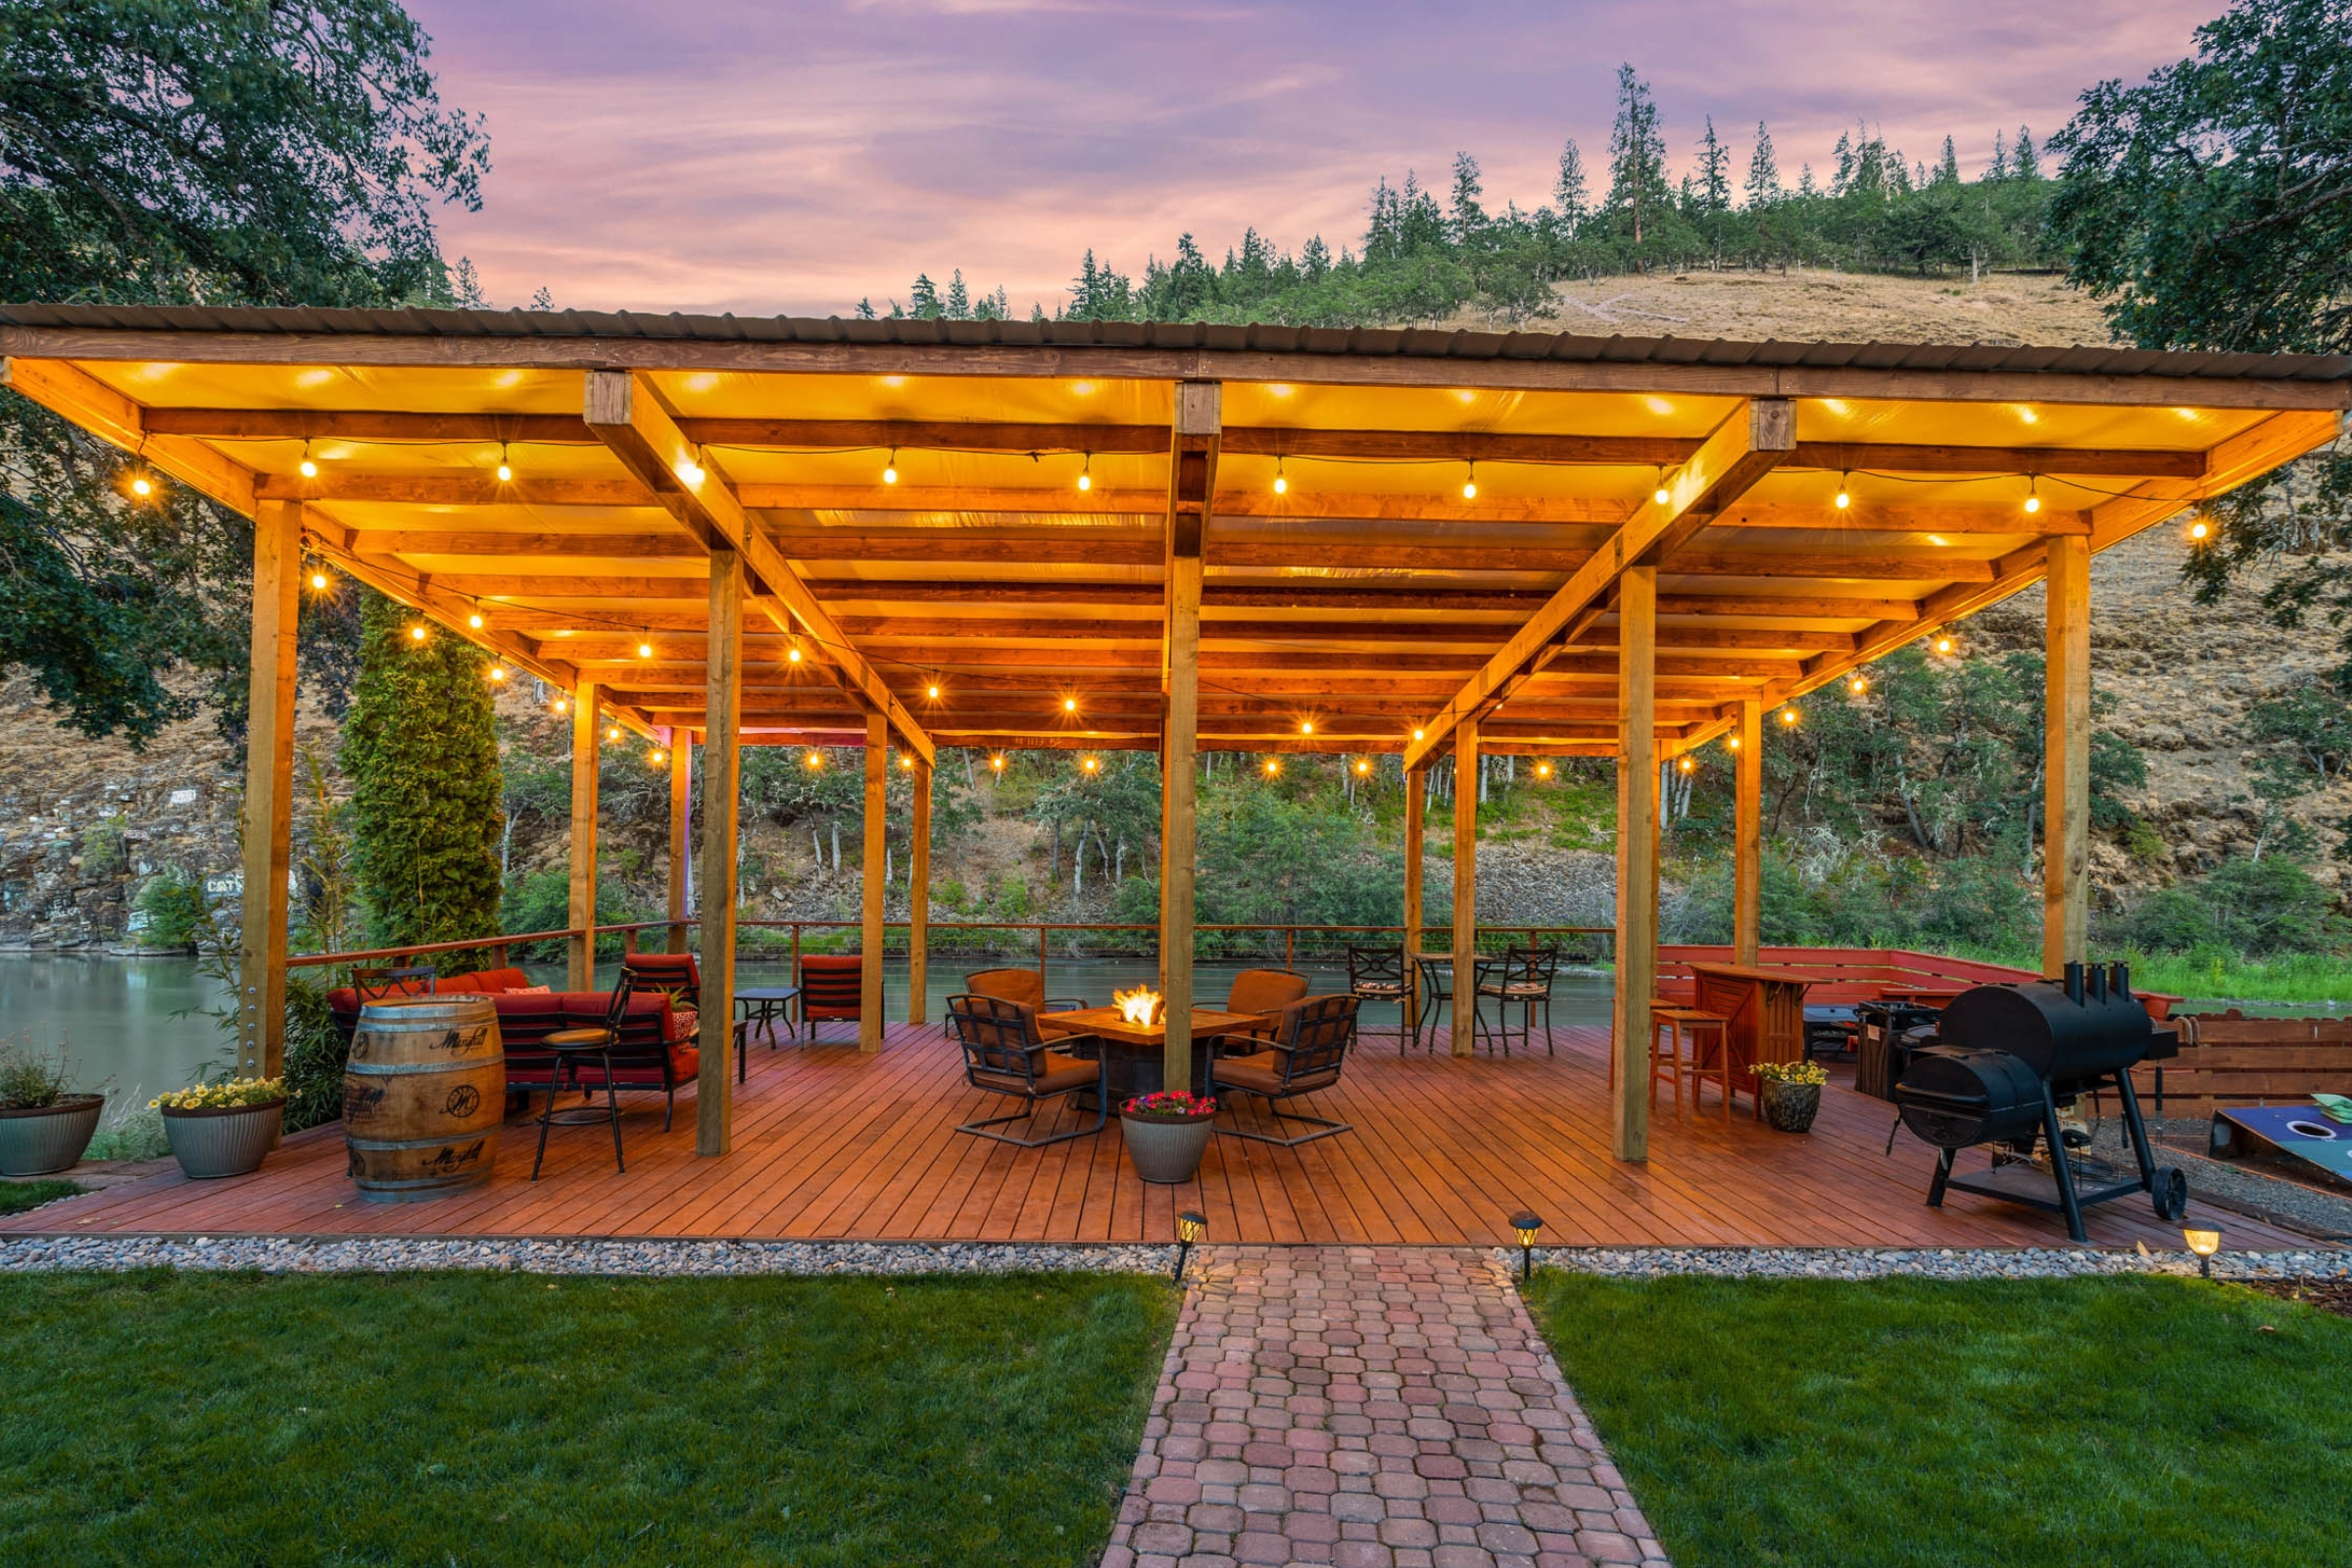 A patio with a fire pit and seating for many people.